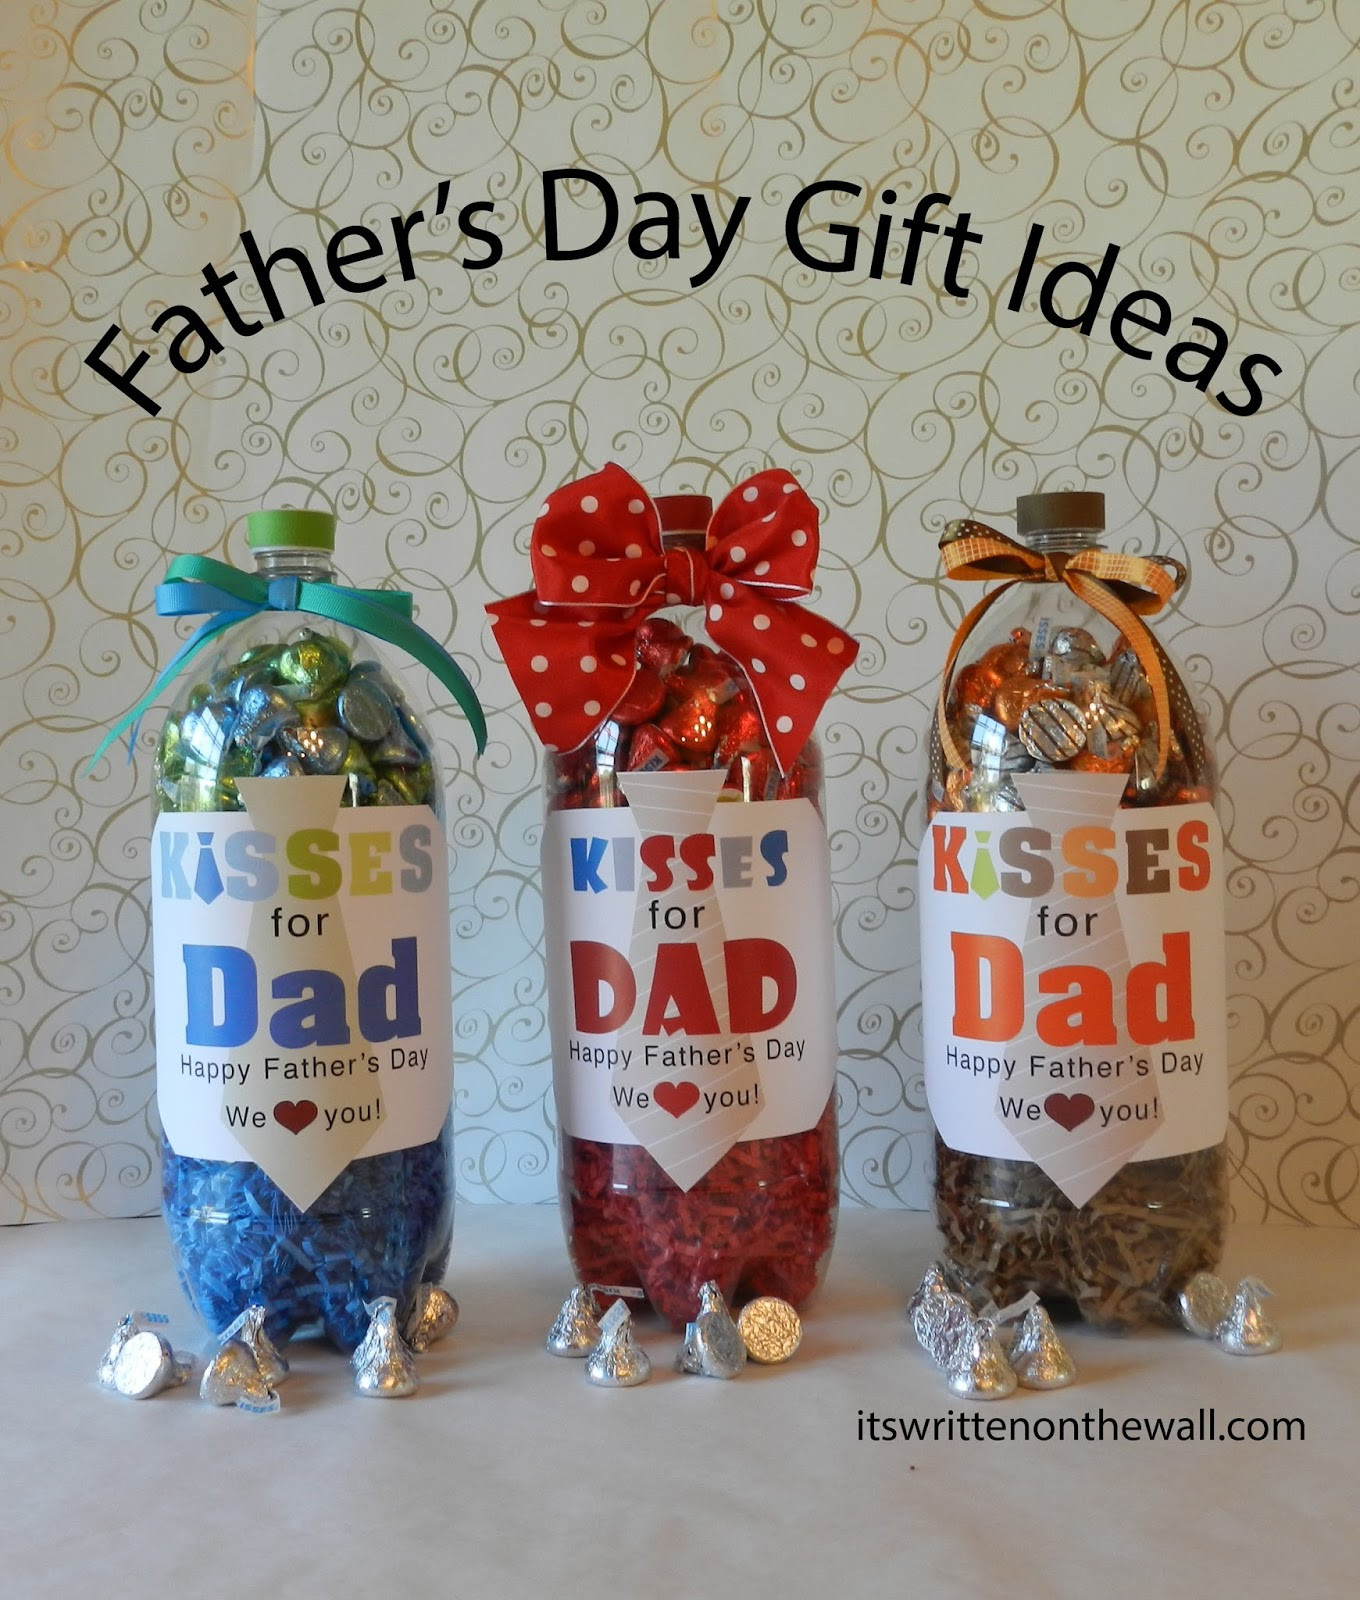 Fathersday Gift Ideas
 It s Written on the Wall Fathers Day Gift Ideas For the